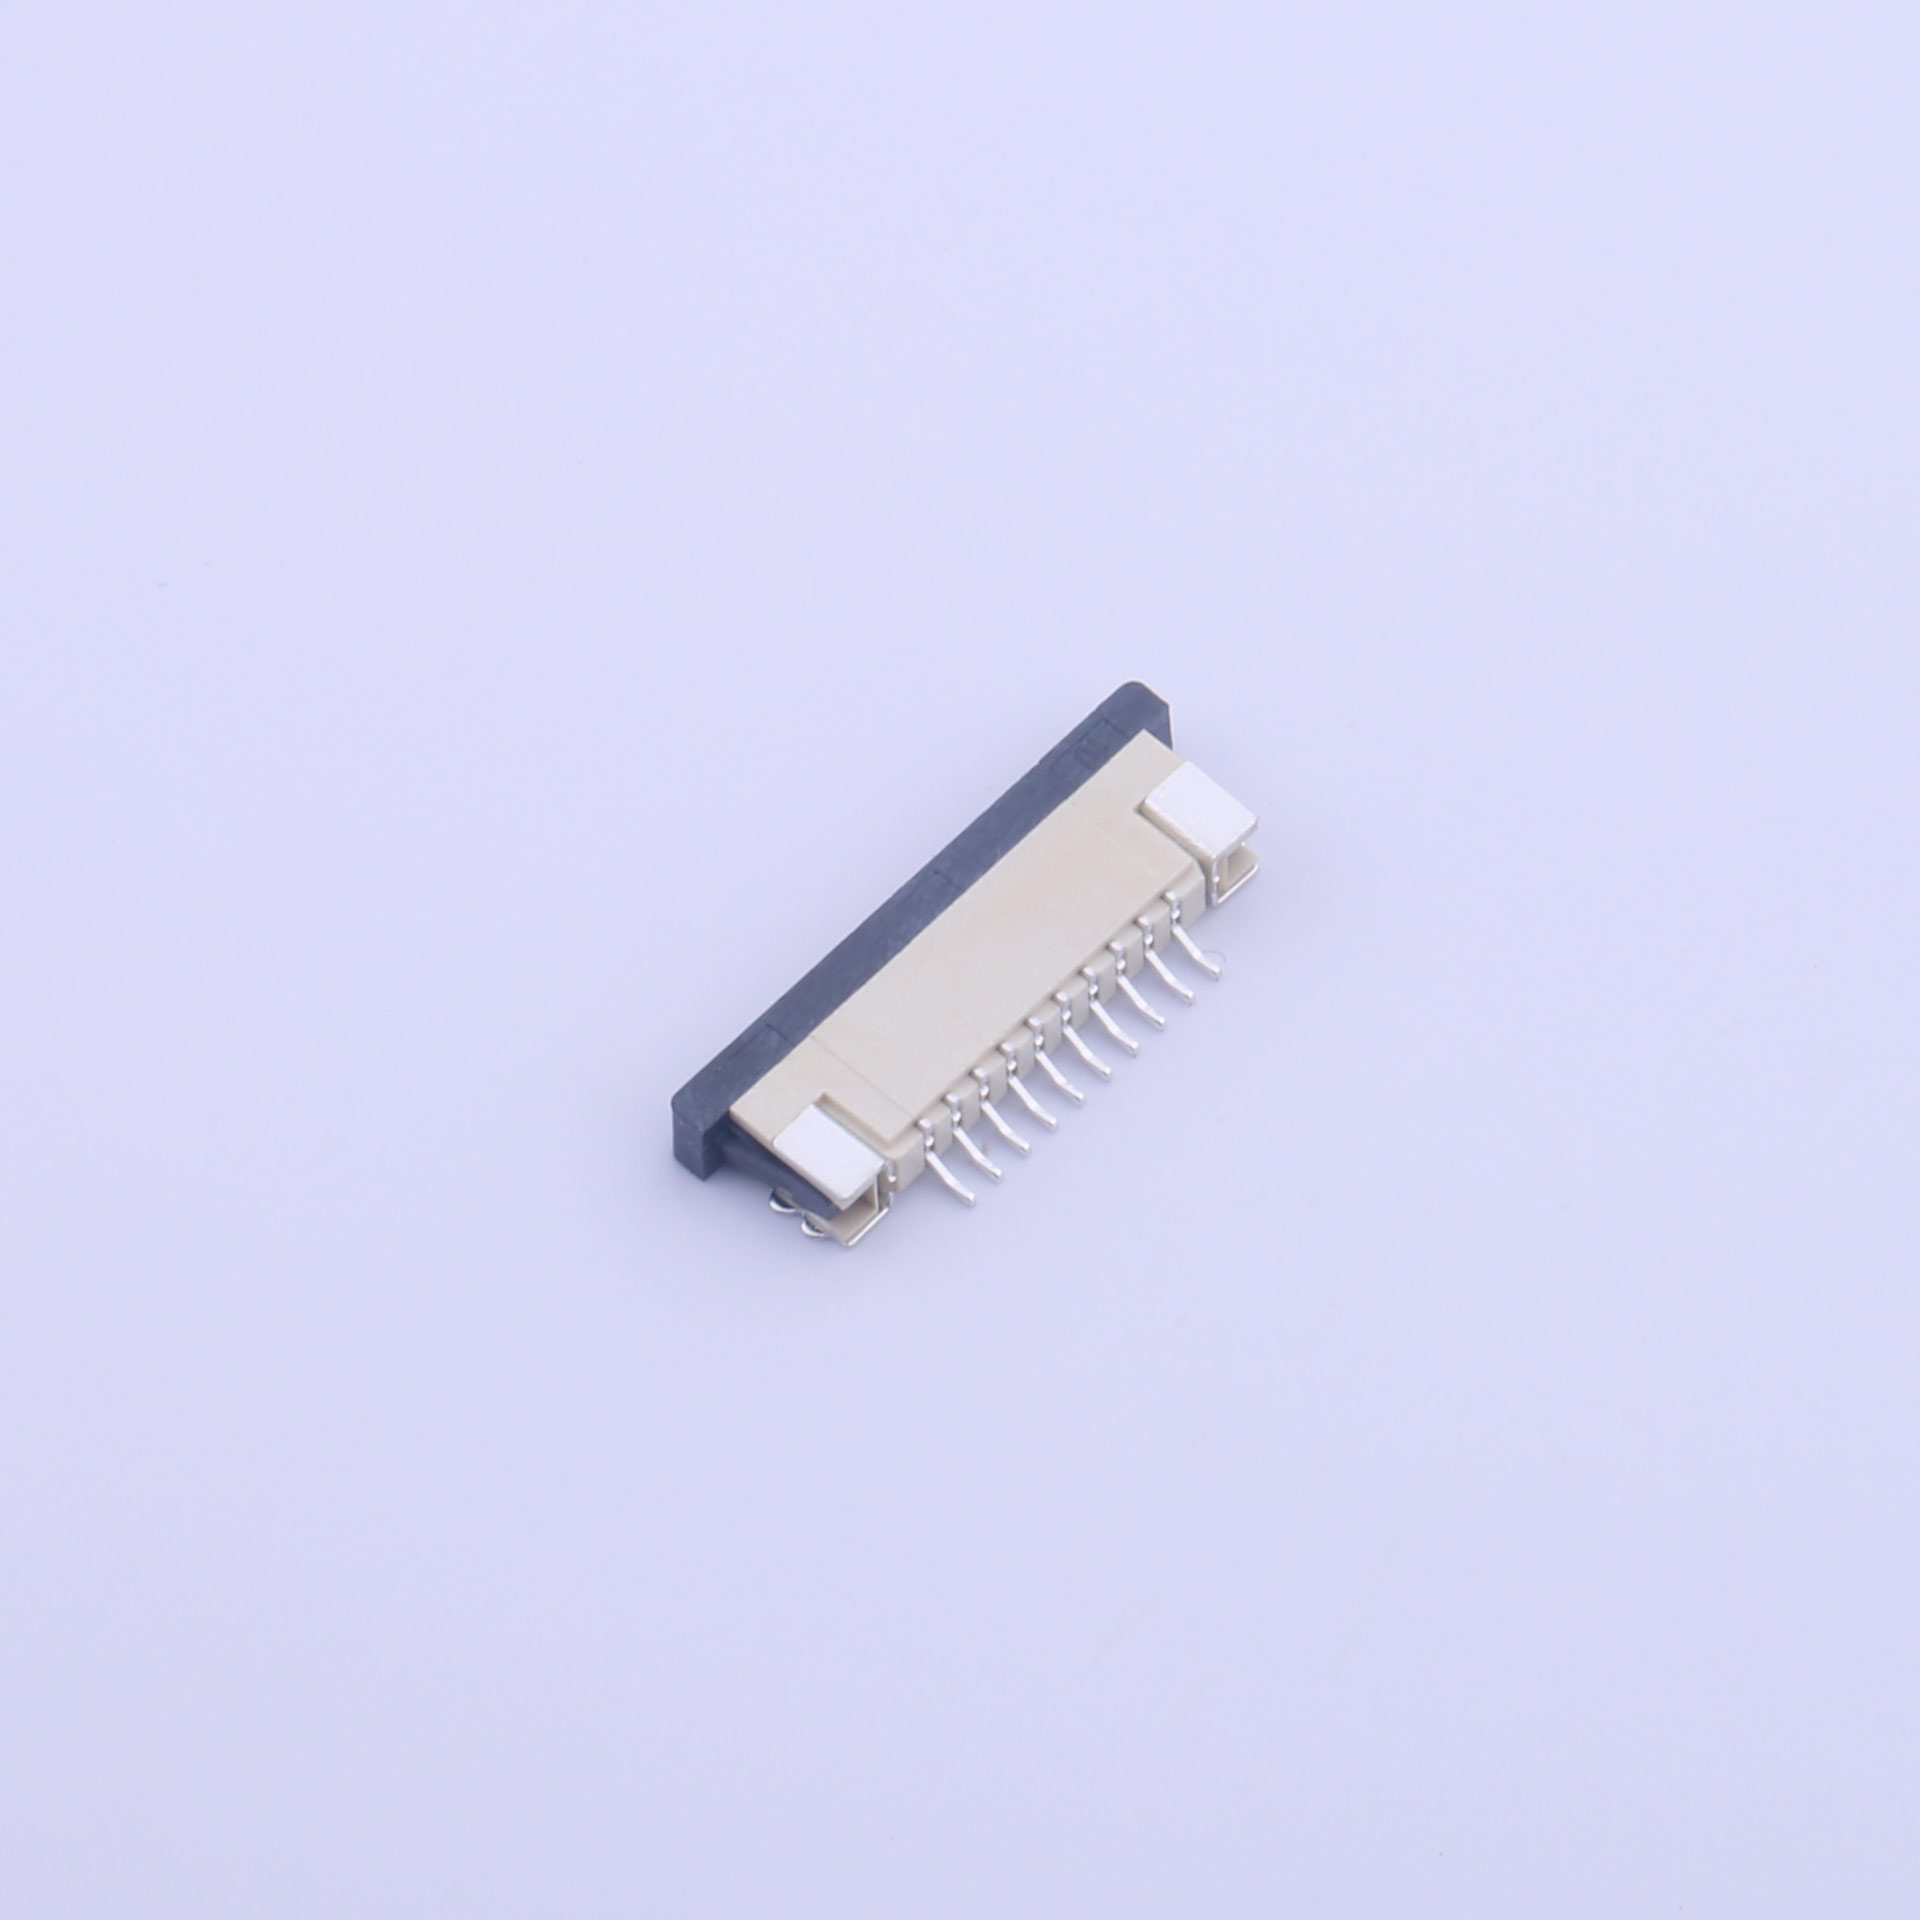 Kinghelm FFC/FPC Connector 10P Pitch 1mm - KH-CL1.0-H2.5-10pin